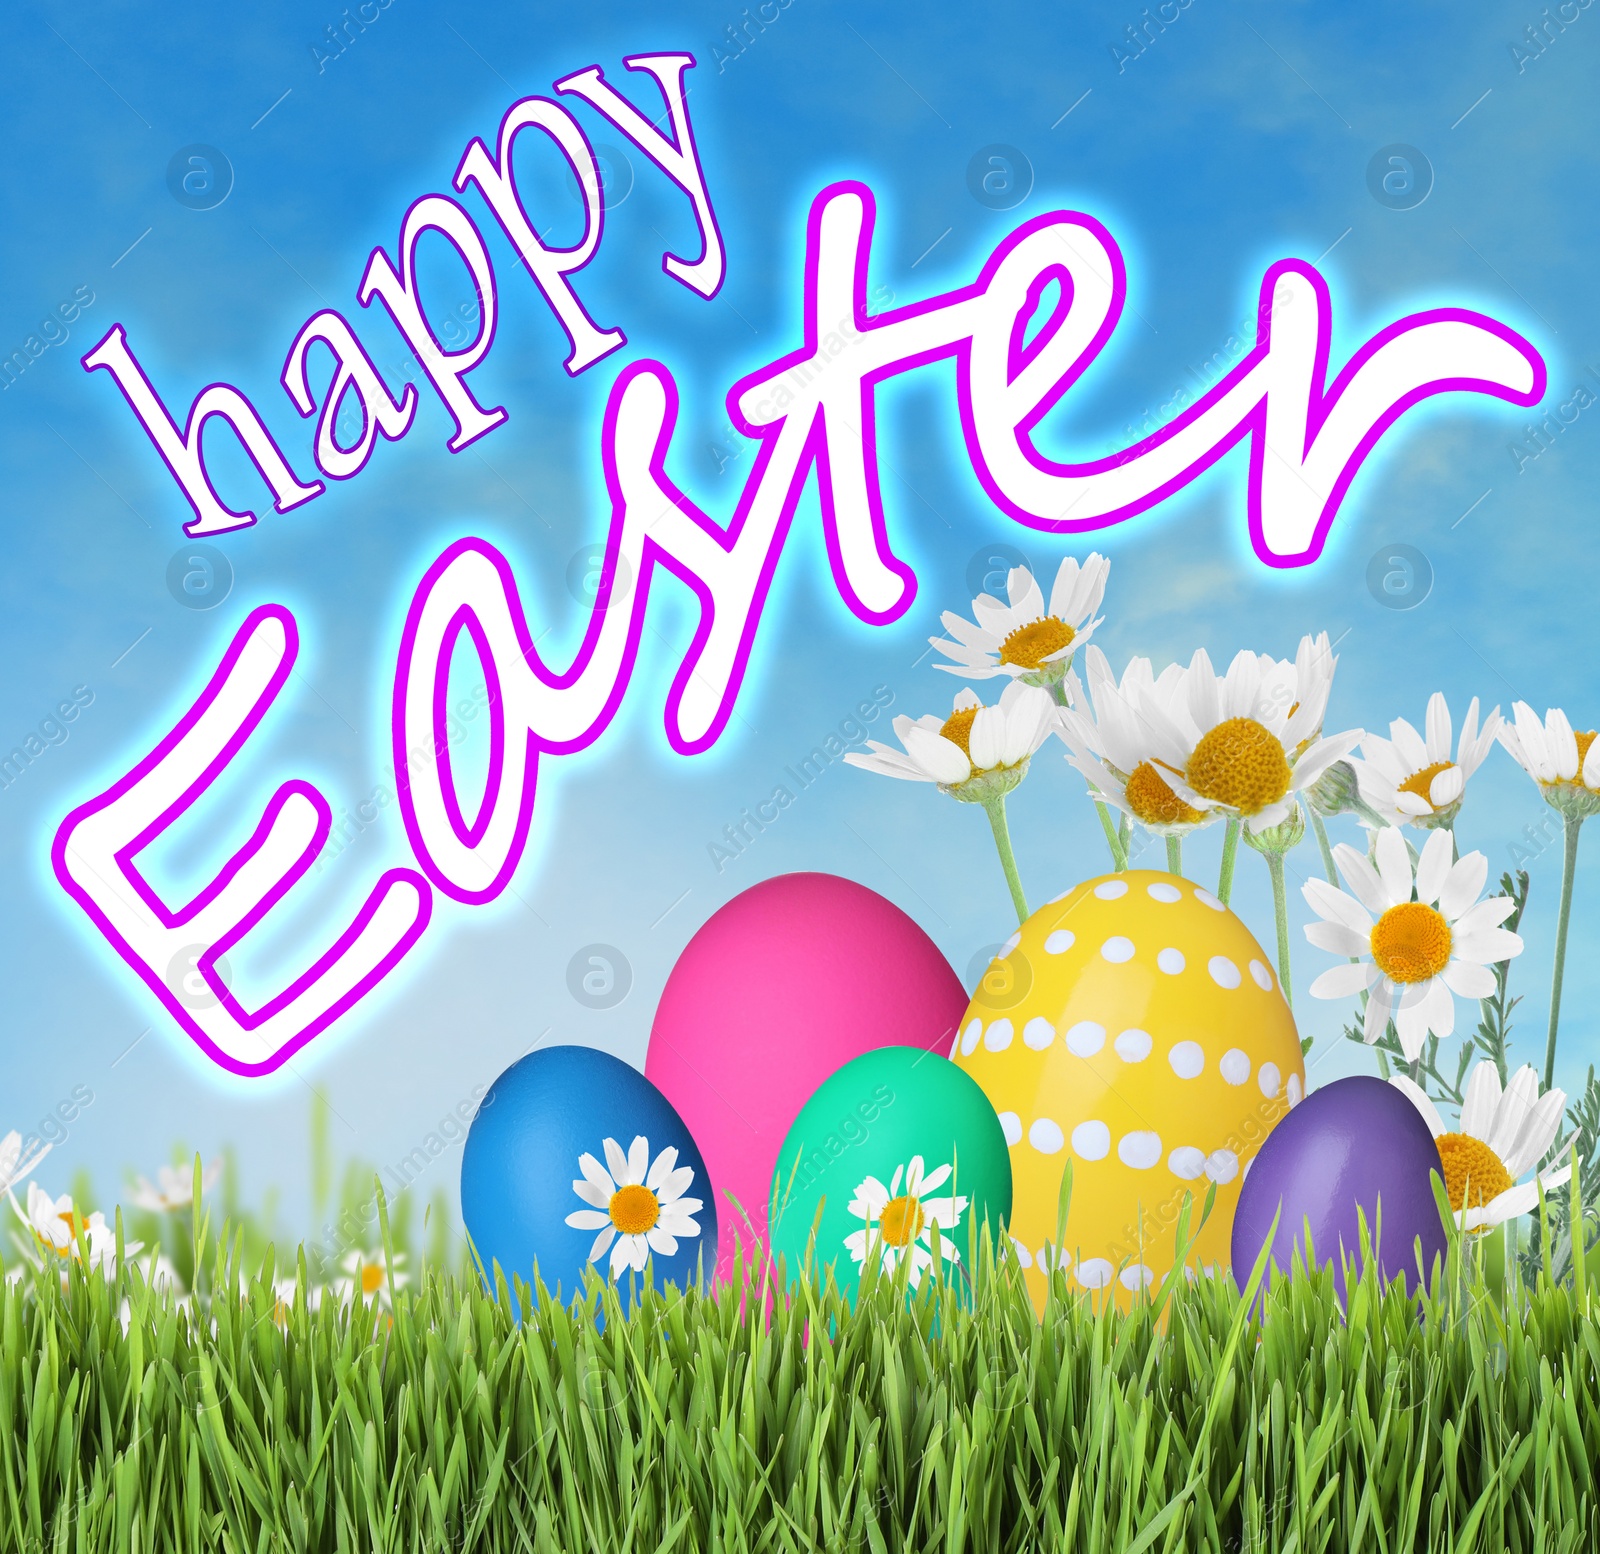 Image of Happy Easter. Bright eggs and spring flowers on green grass outdoors